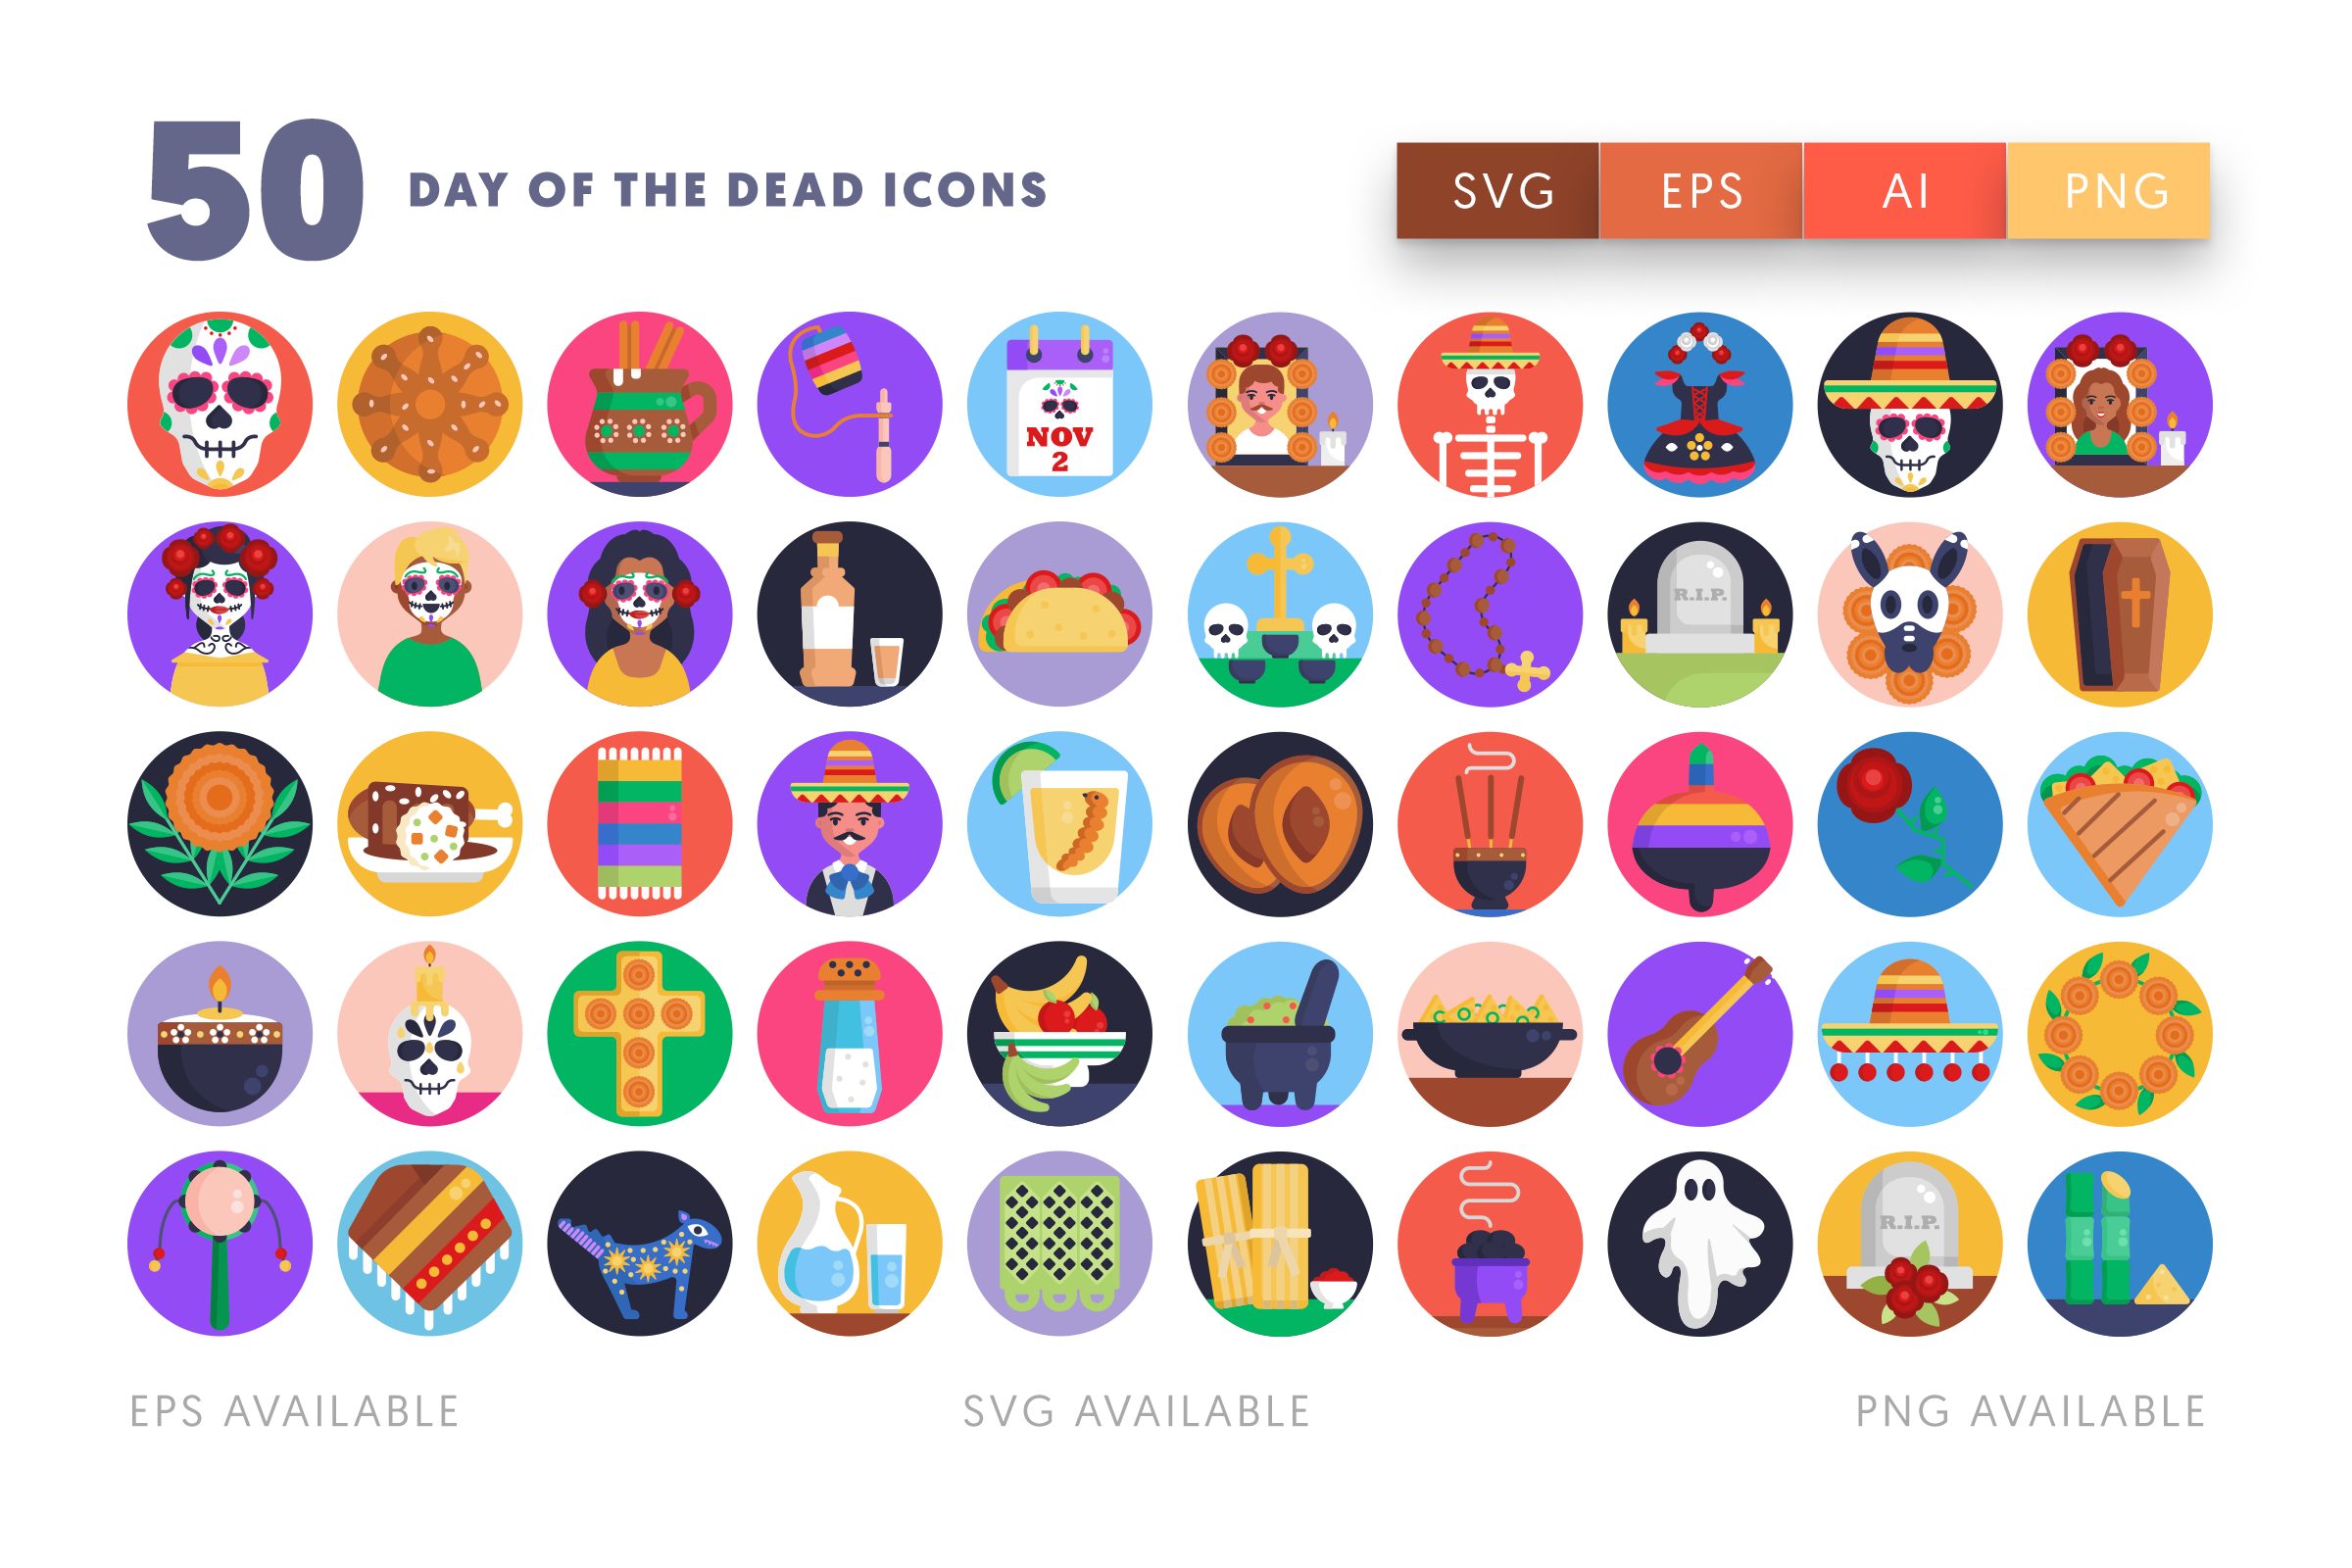 Day of the Dead icons png/svg/eps